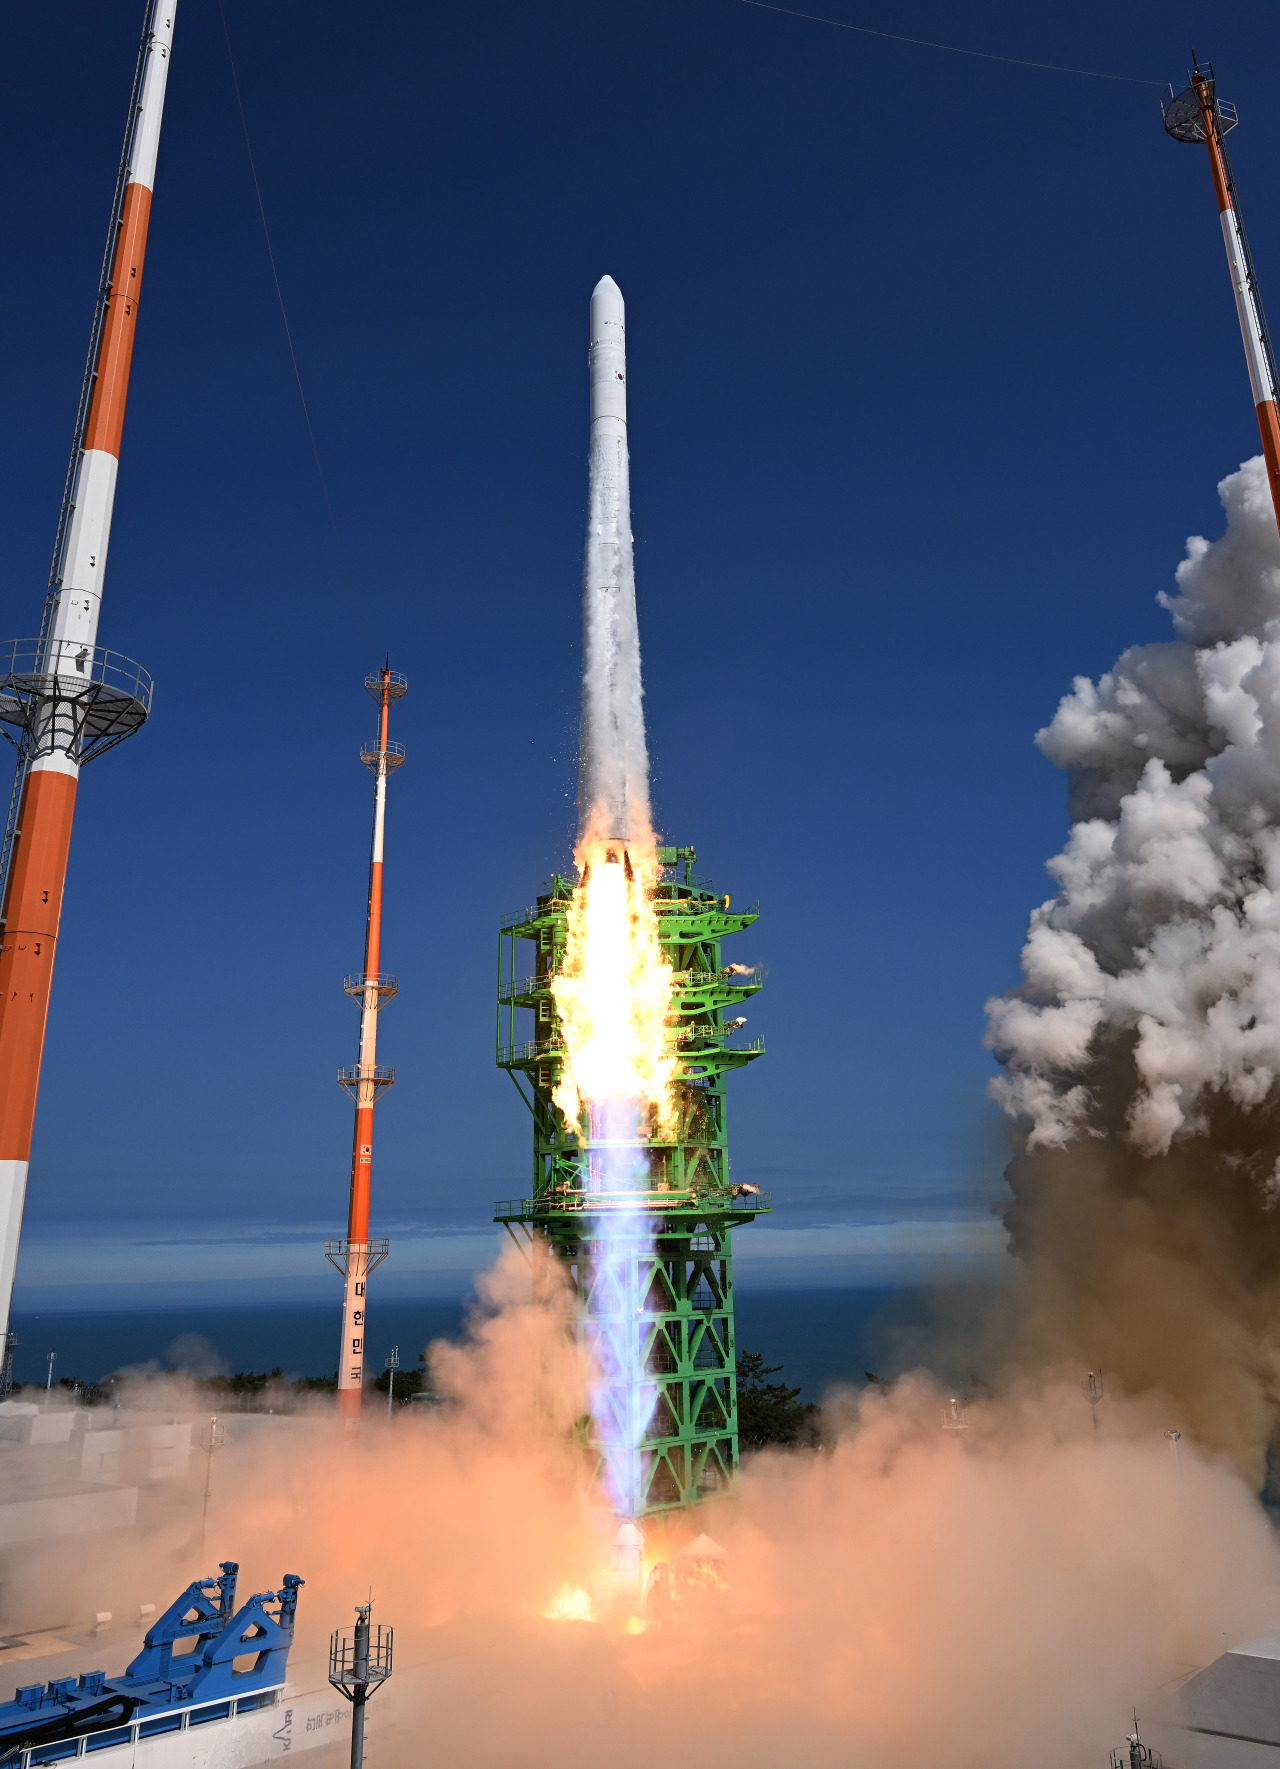 South Korea’s Nuri rocket, also known as Korea Satellite Launch Vehicle-II, is launched at Naro Space Center in Goheung, South Jeolla Province, Tuesday. (Joint Press Corps)